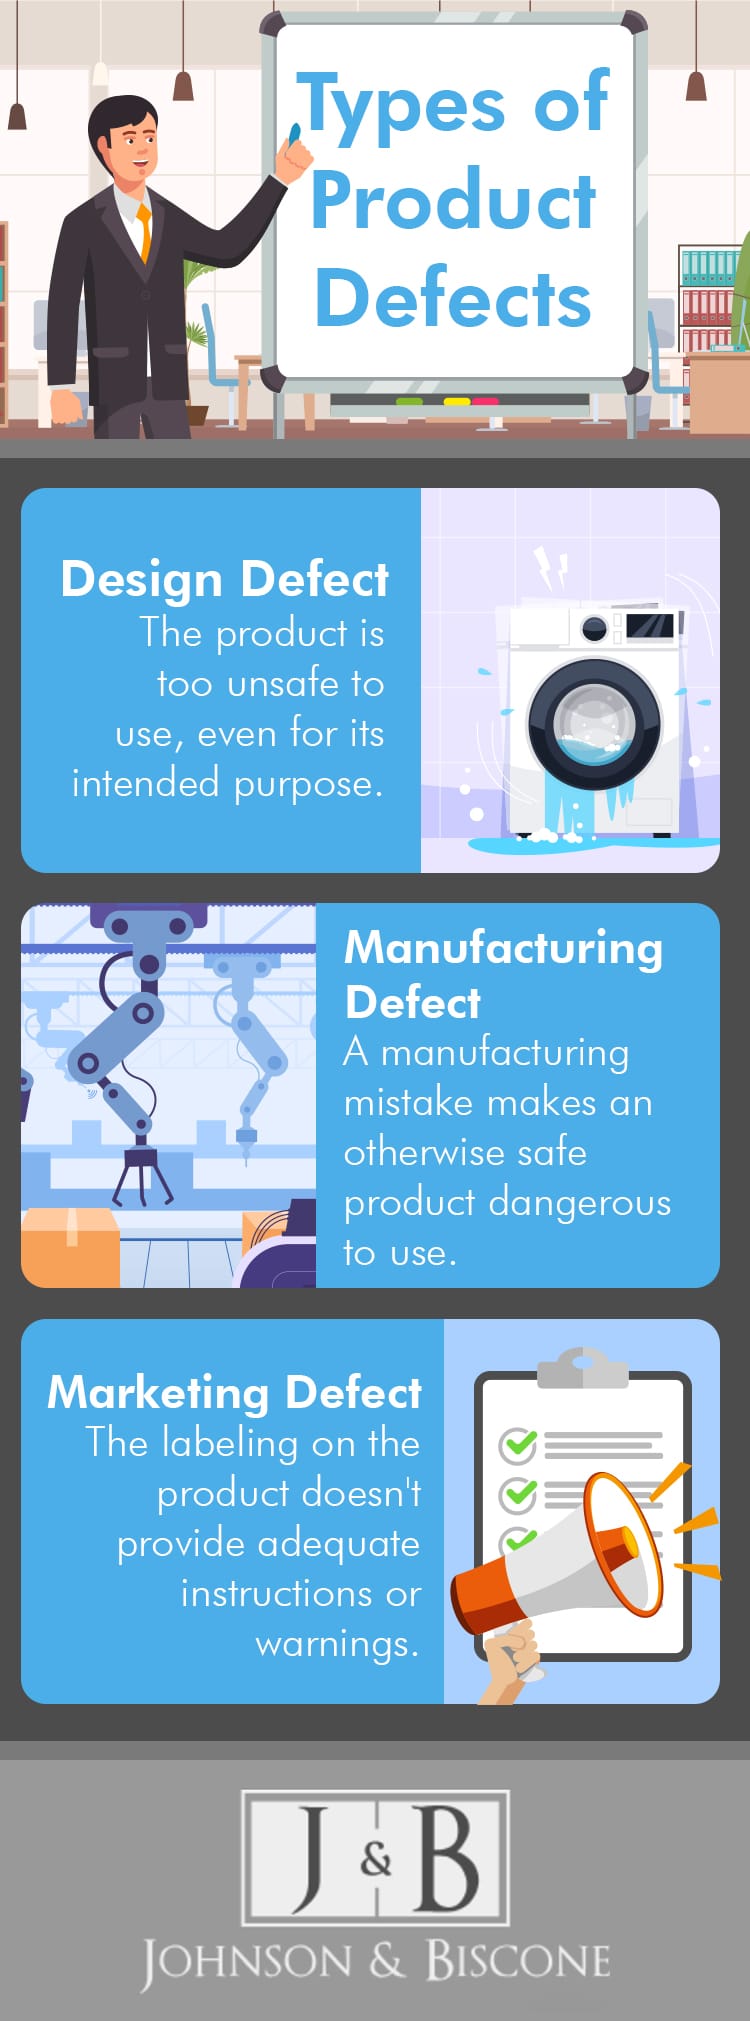 Types of product defects